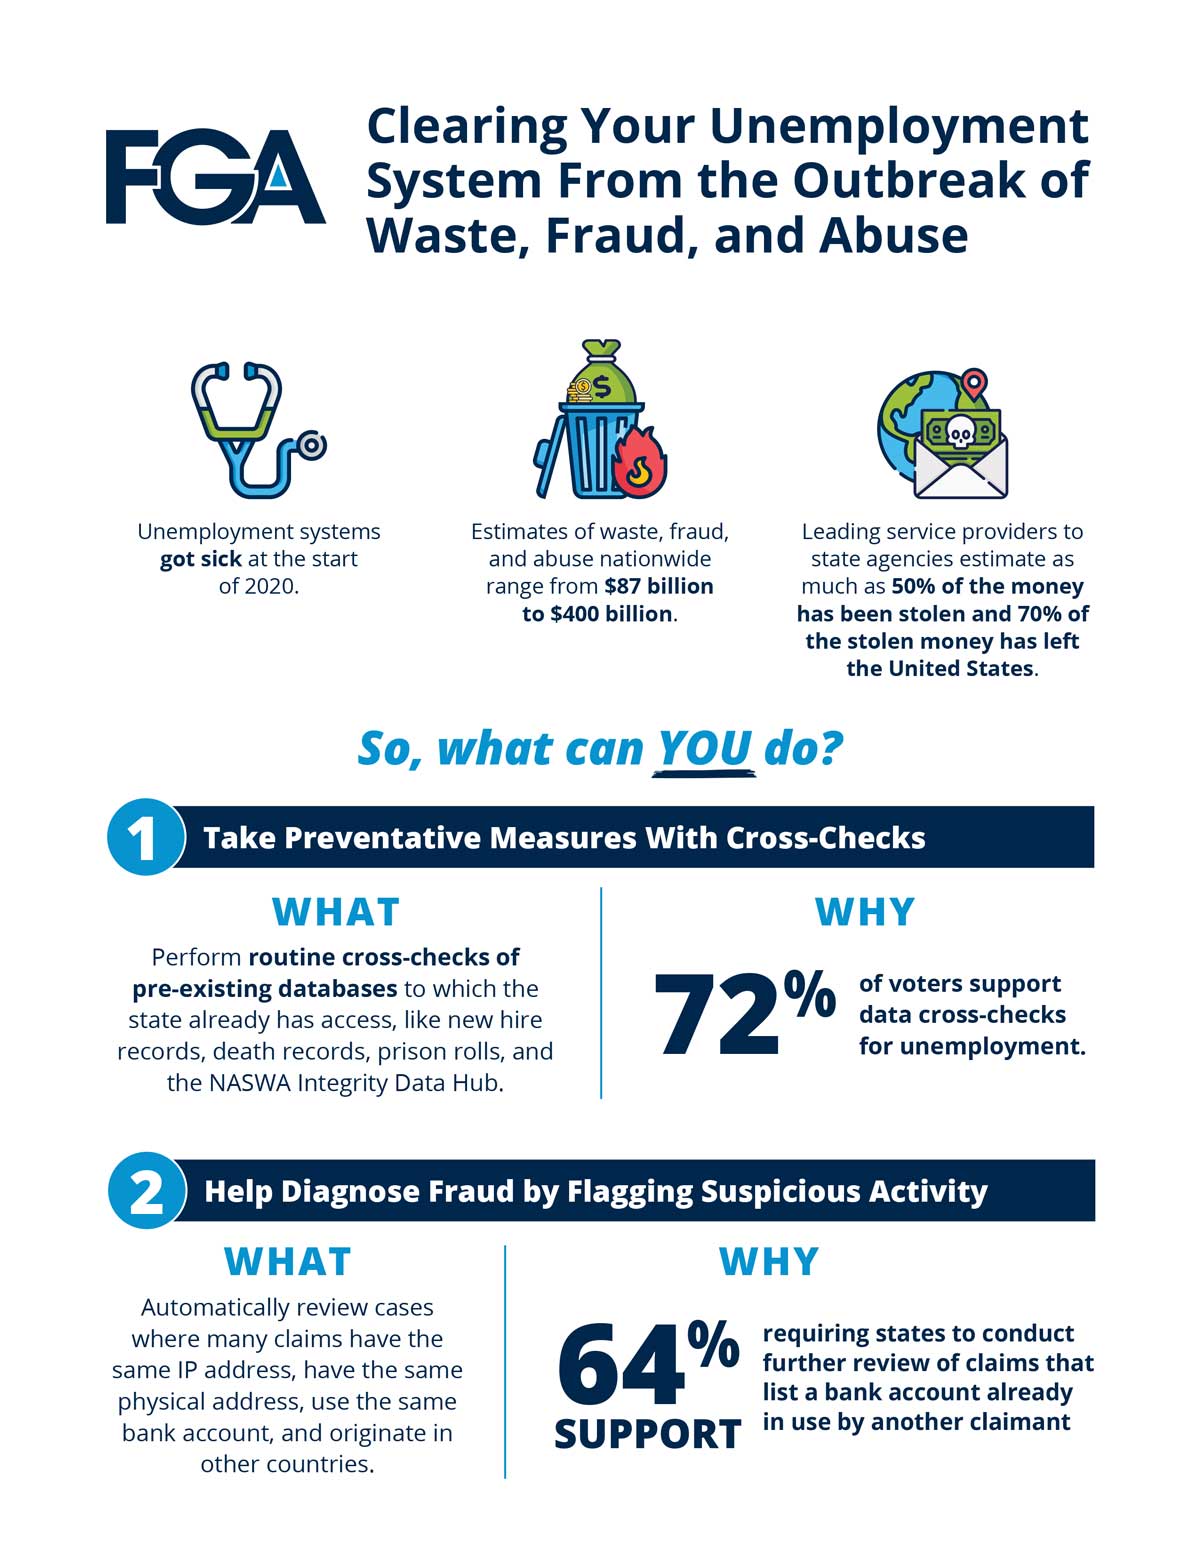 Clearing Your Unemployment System From the Outbreak of Waste, Fraud, and Abuse